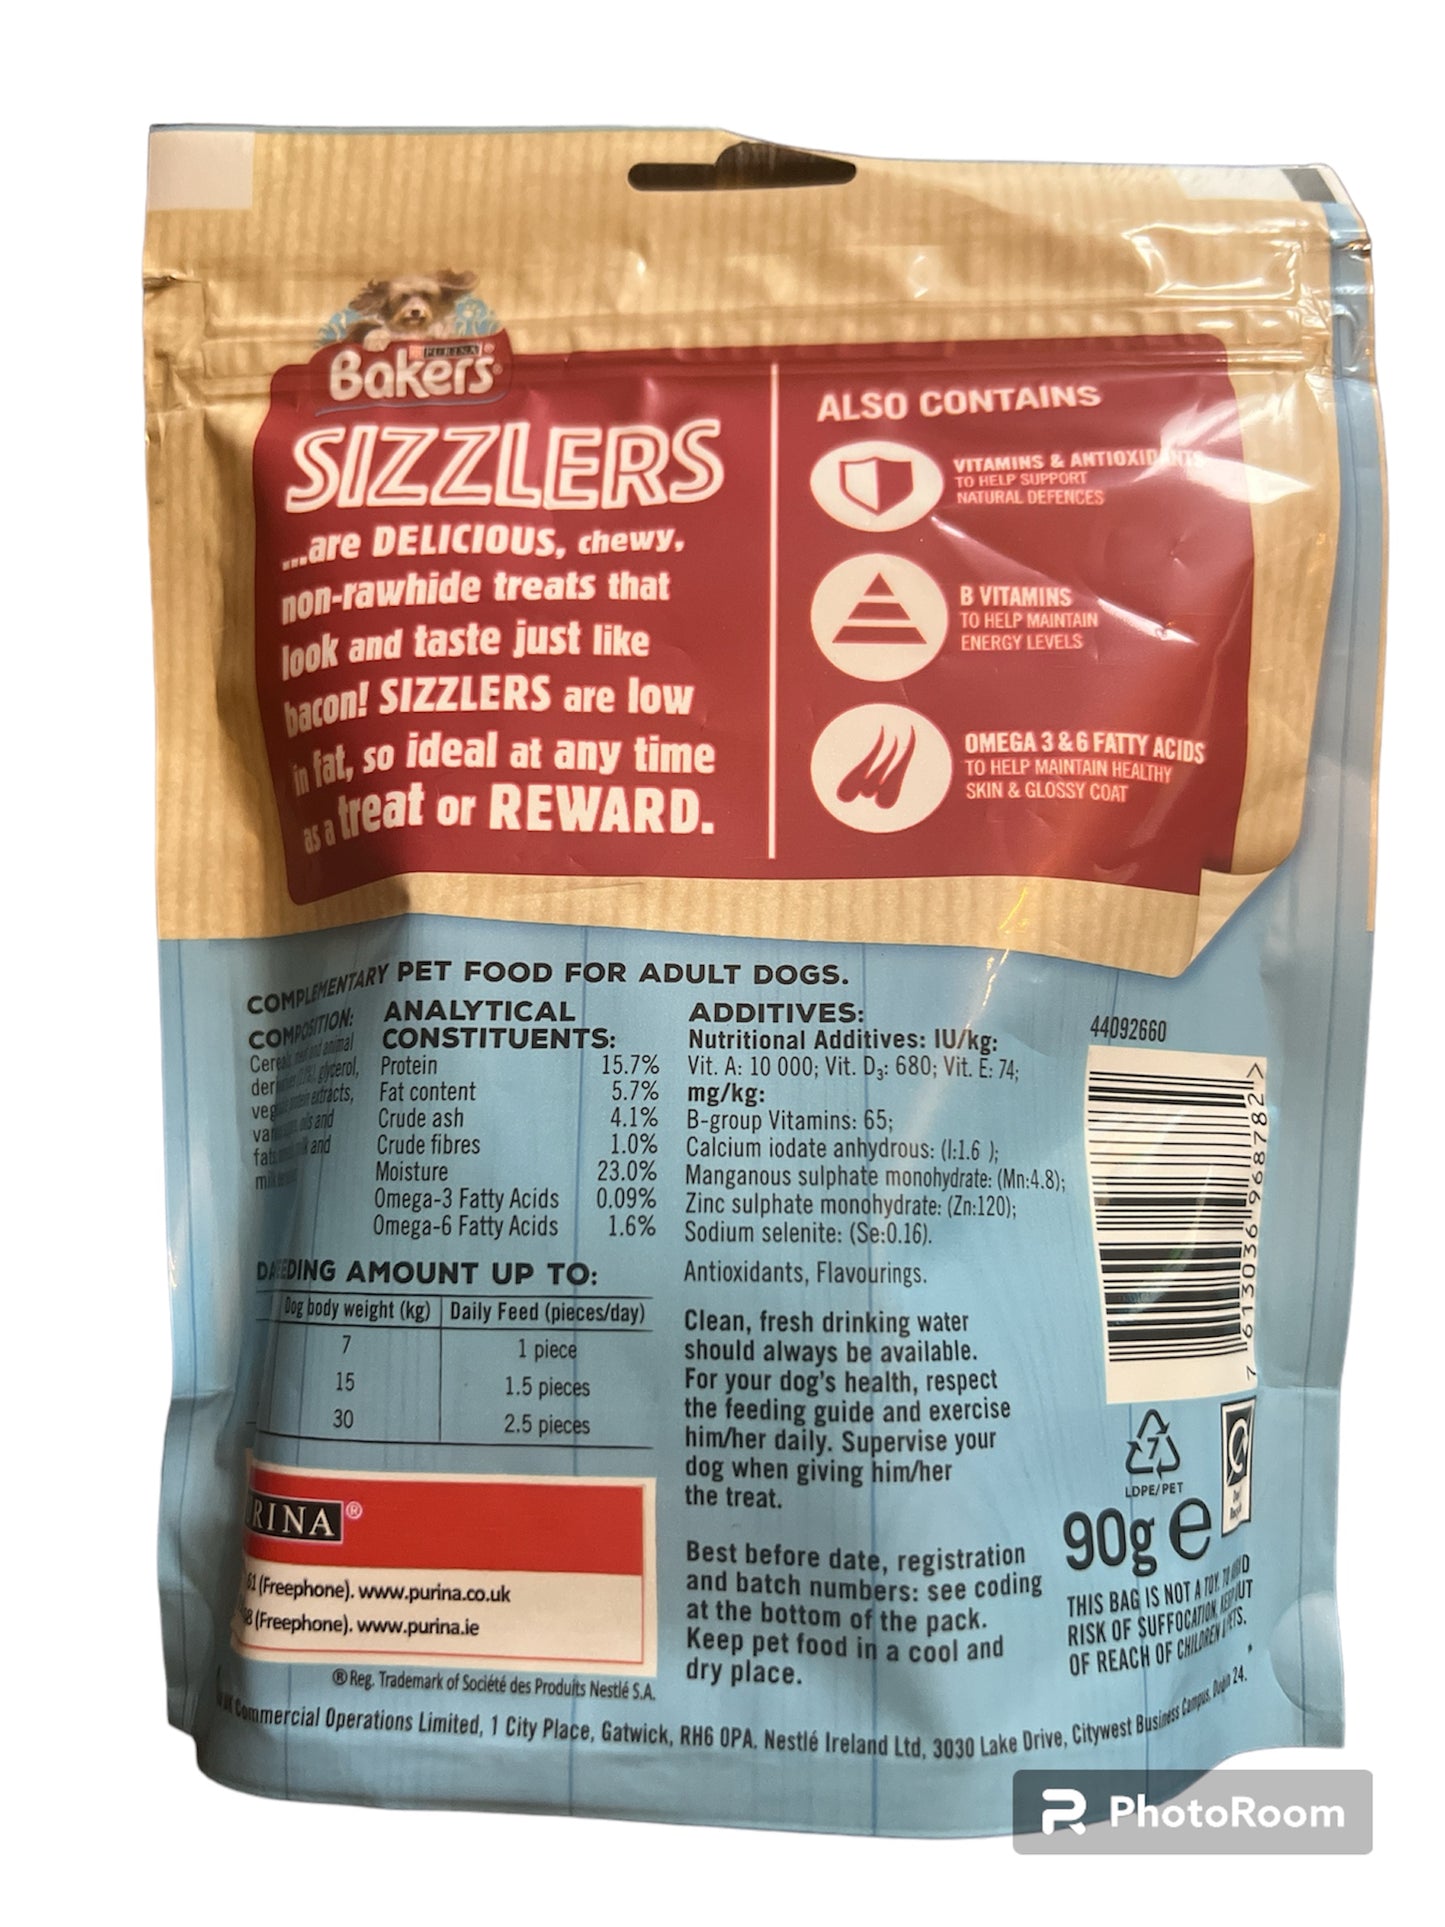 Bakers Sizzlers Deliciously Meaty Treats Bacon Flavour